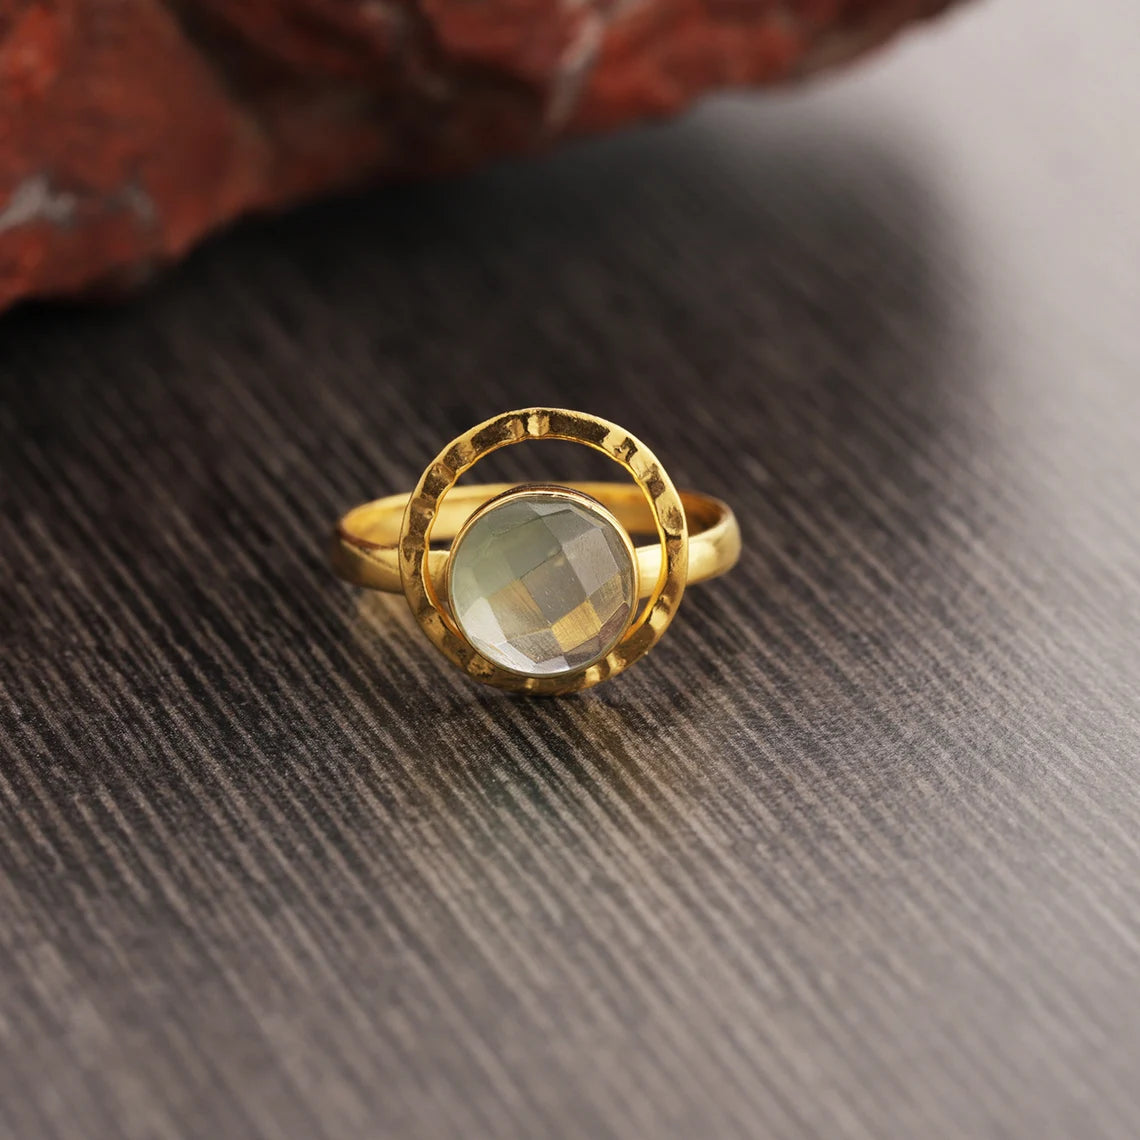 Prehnite Ring, Sterling Silver Ring, Prehnite Stone, Beautiful Ring, Natural Stone, Handmade Ring, Round Gold Ring, Free Shipping